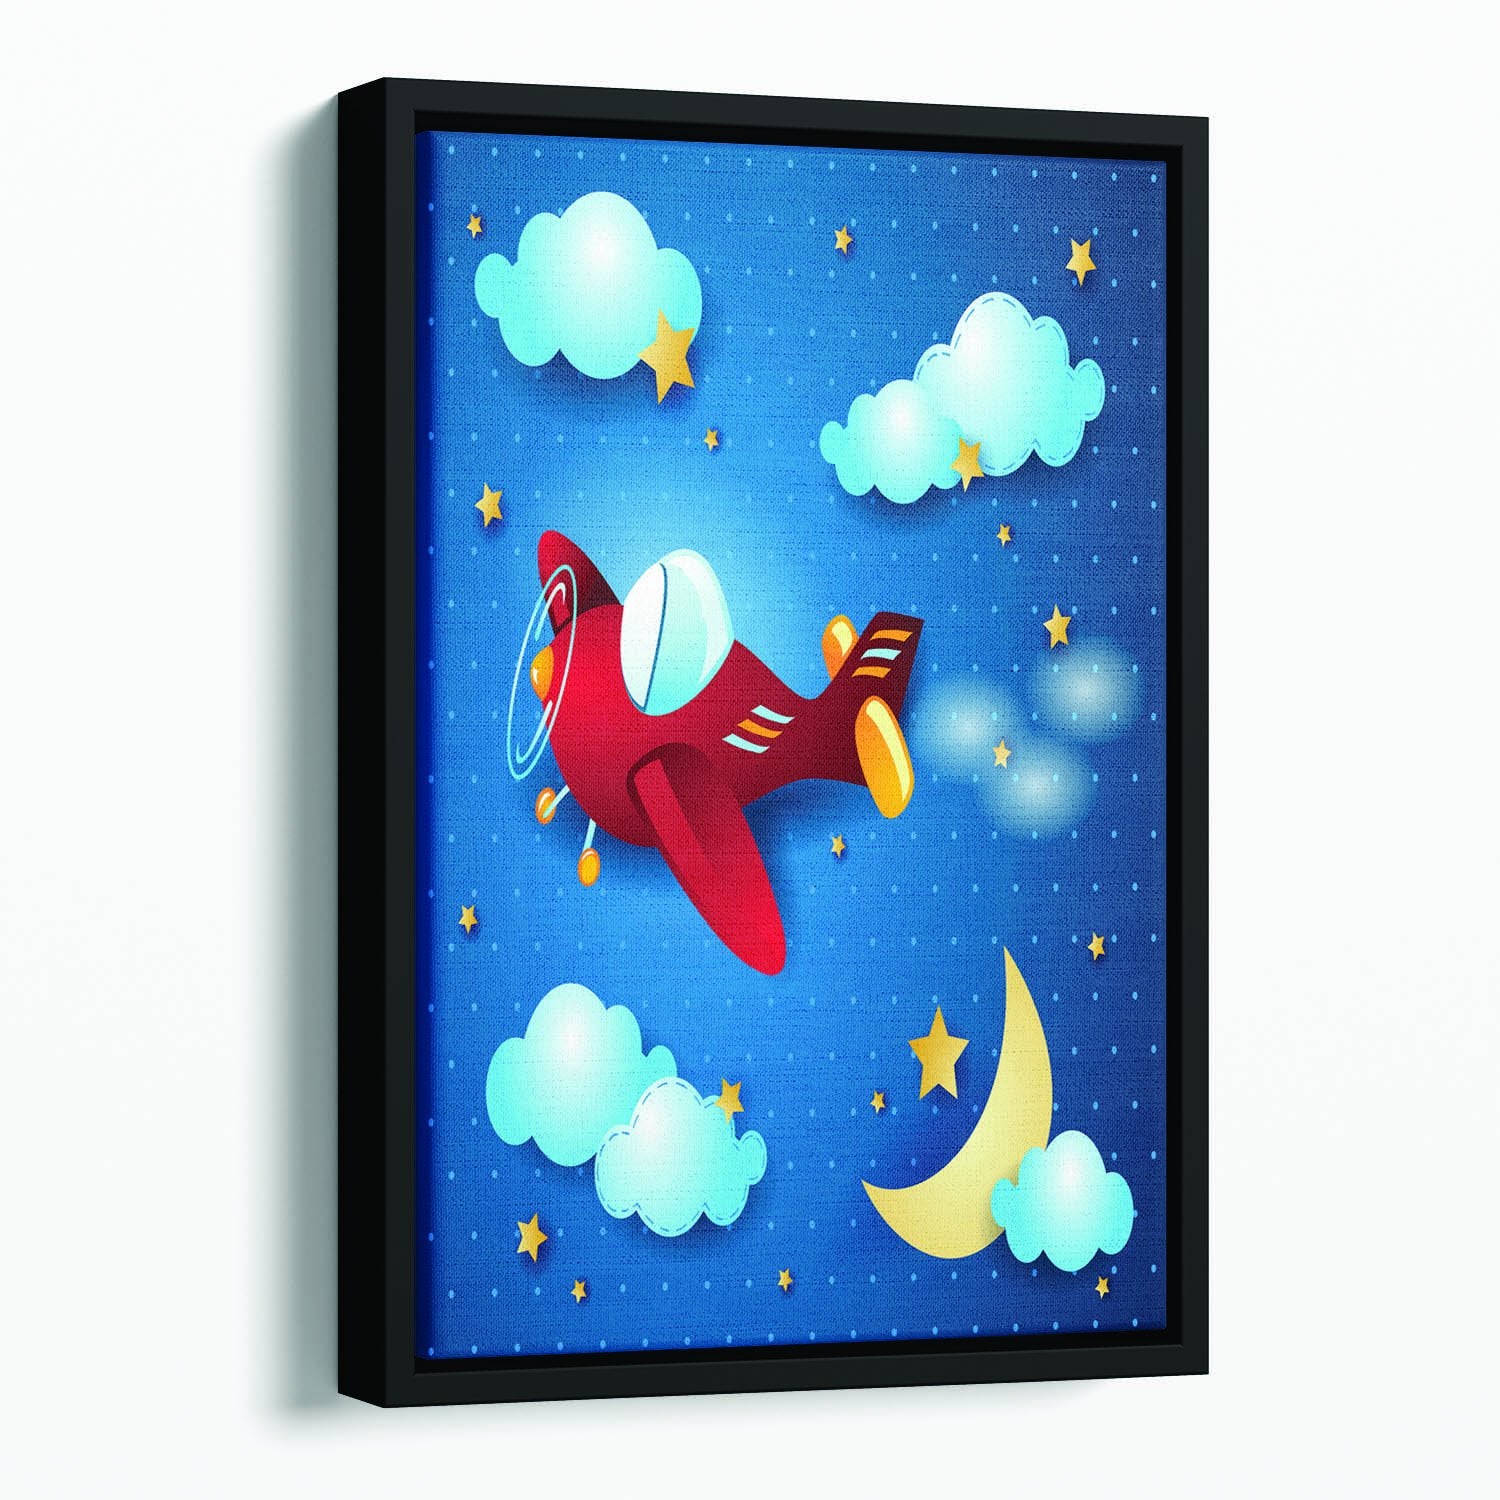 Retro airplane by night Floating Framed Canvas